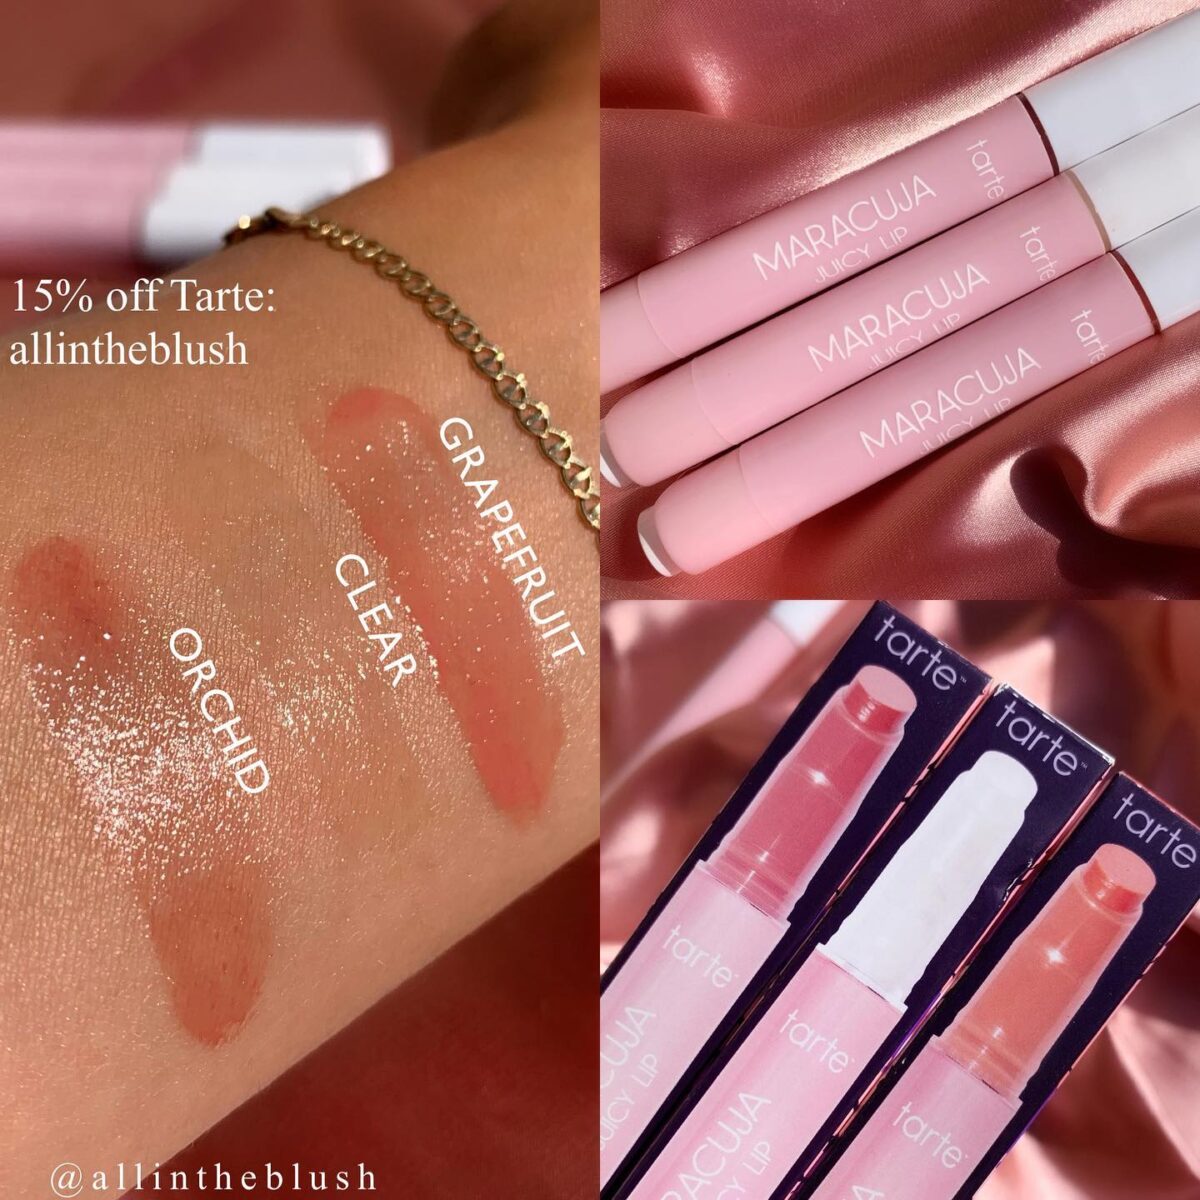 Tarte Maracuja Juicy Lip Balm Review & Swatches - Save 15% off Tarte with code: ALLINTHEBLUSH